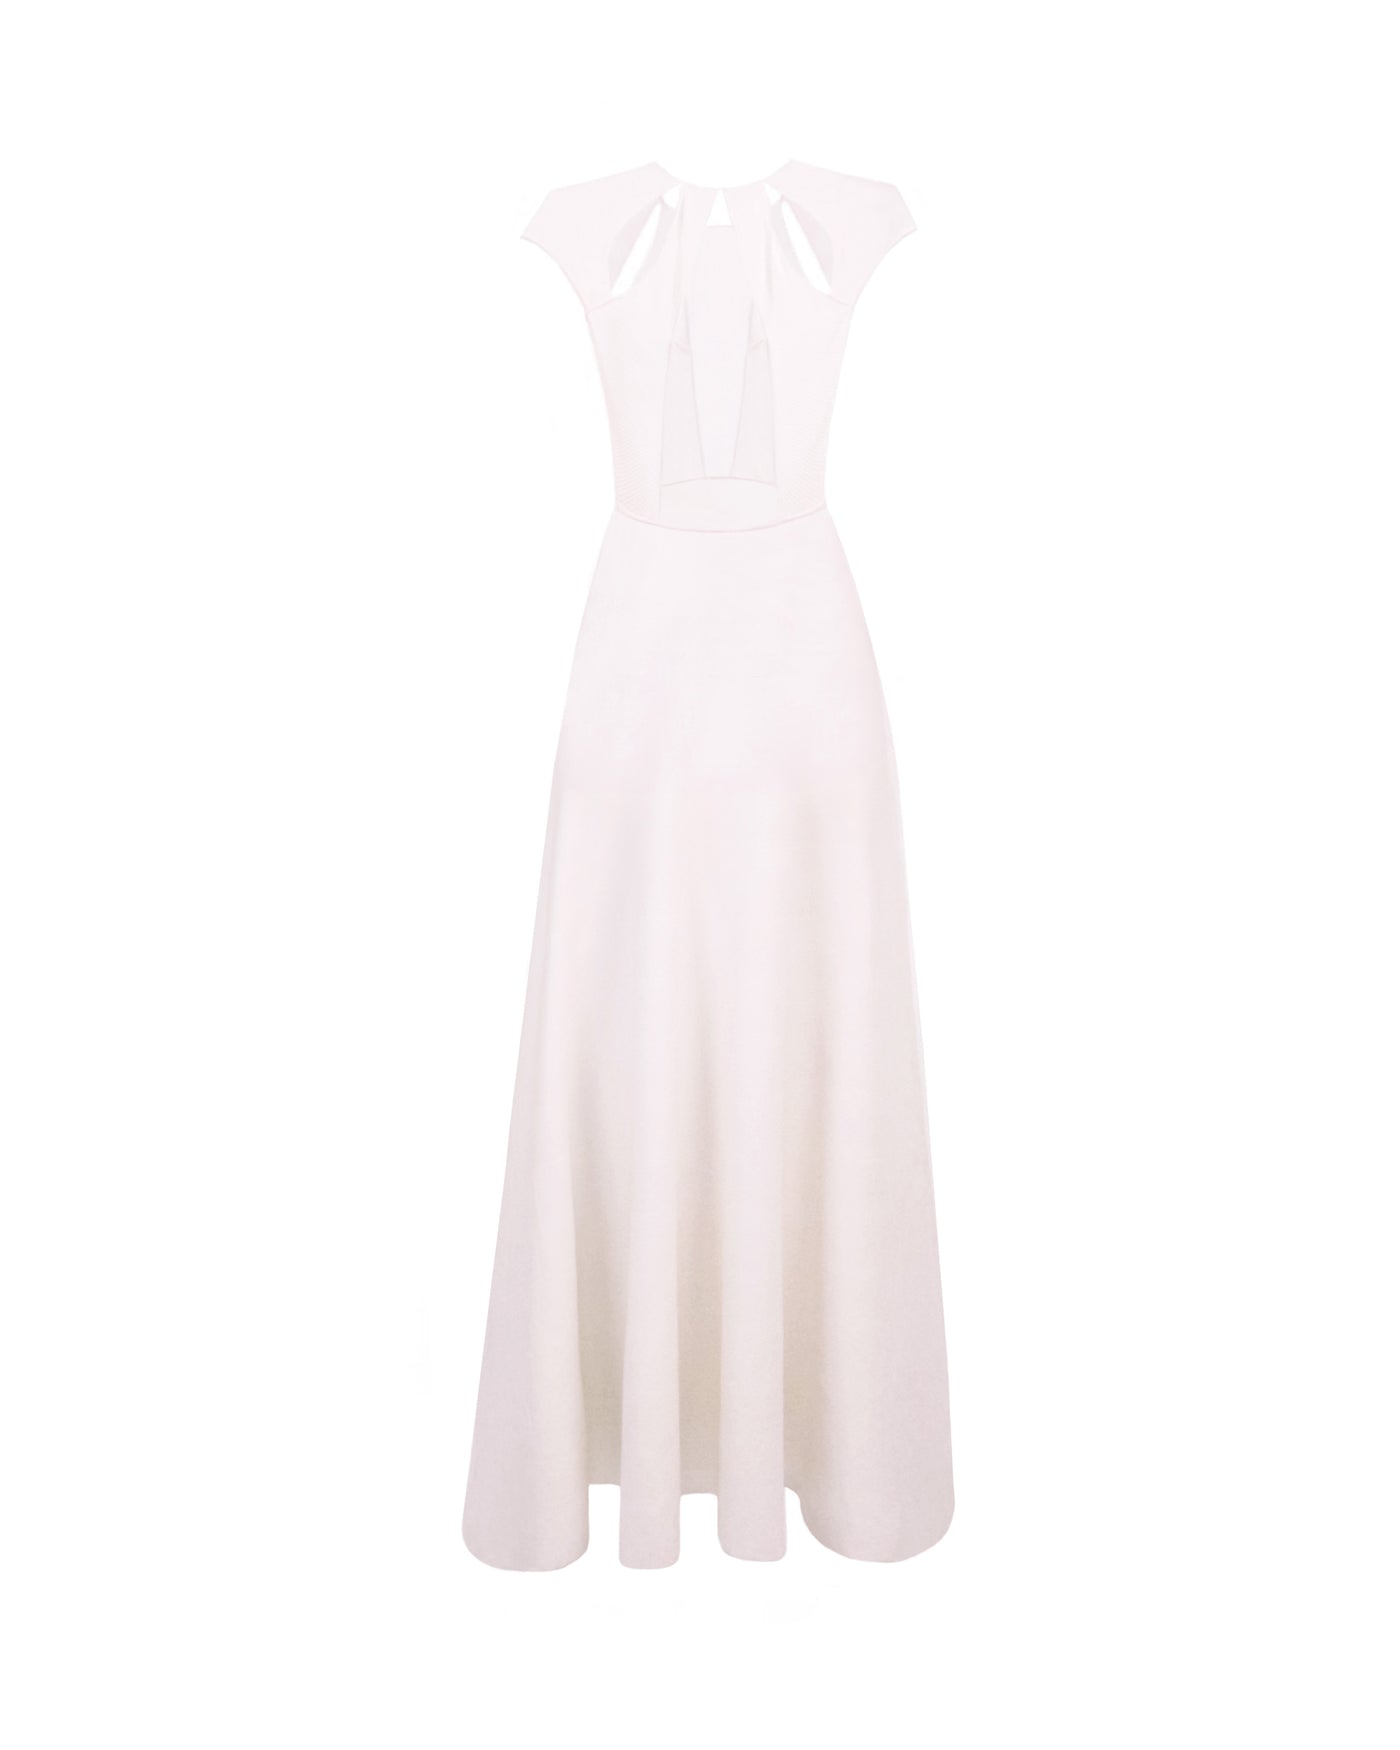 White Knit Midi Dress With Cut-Outs